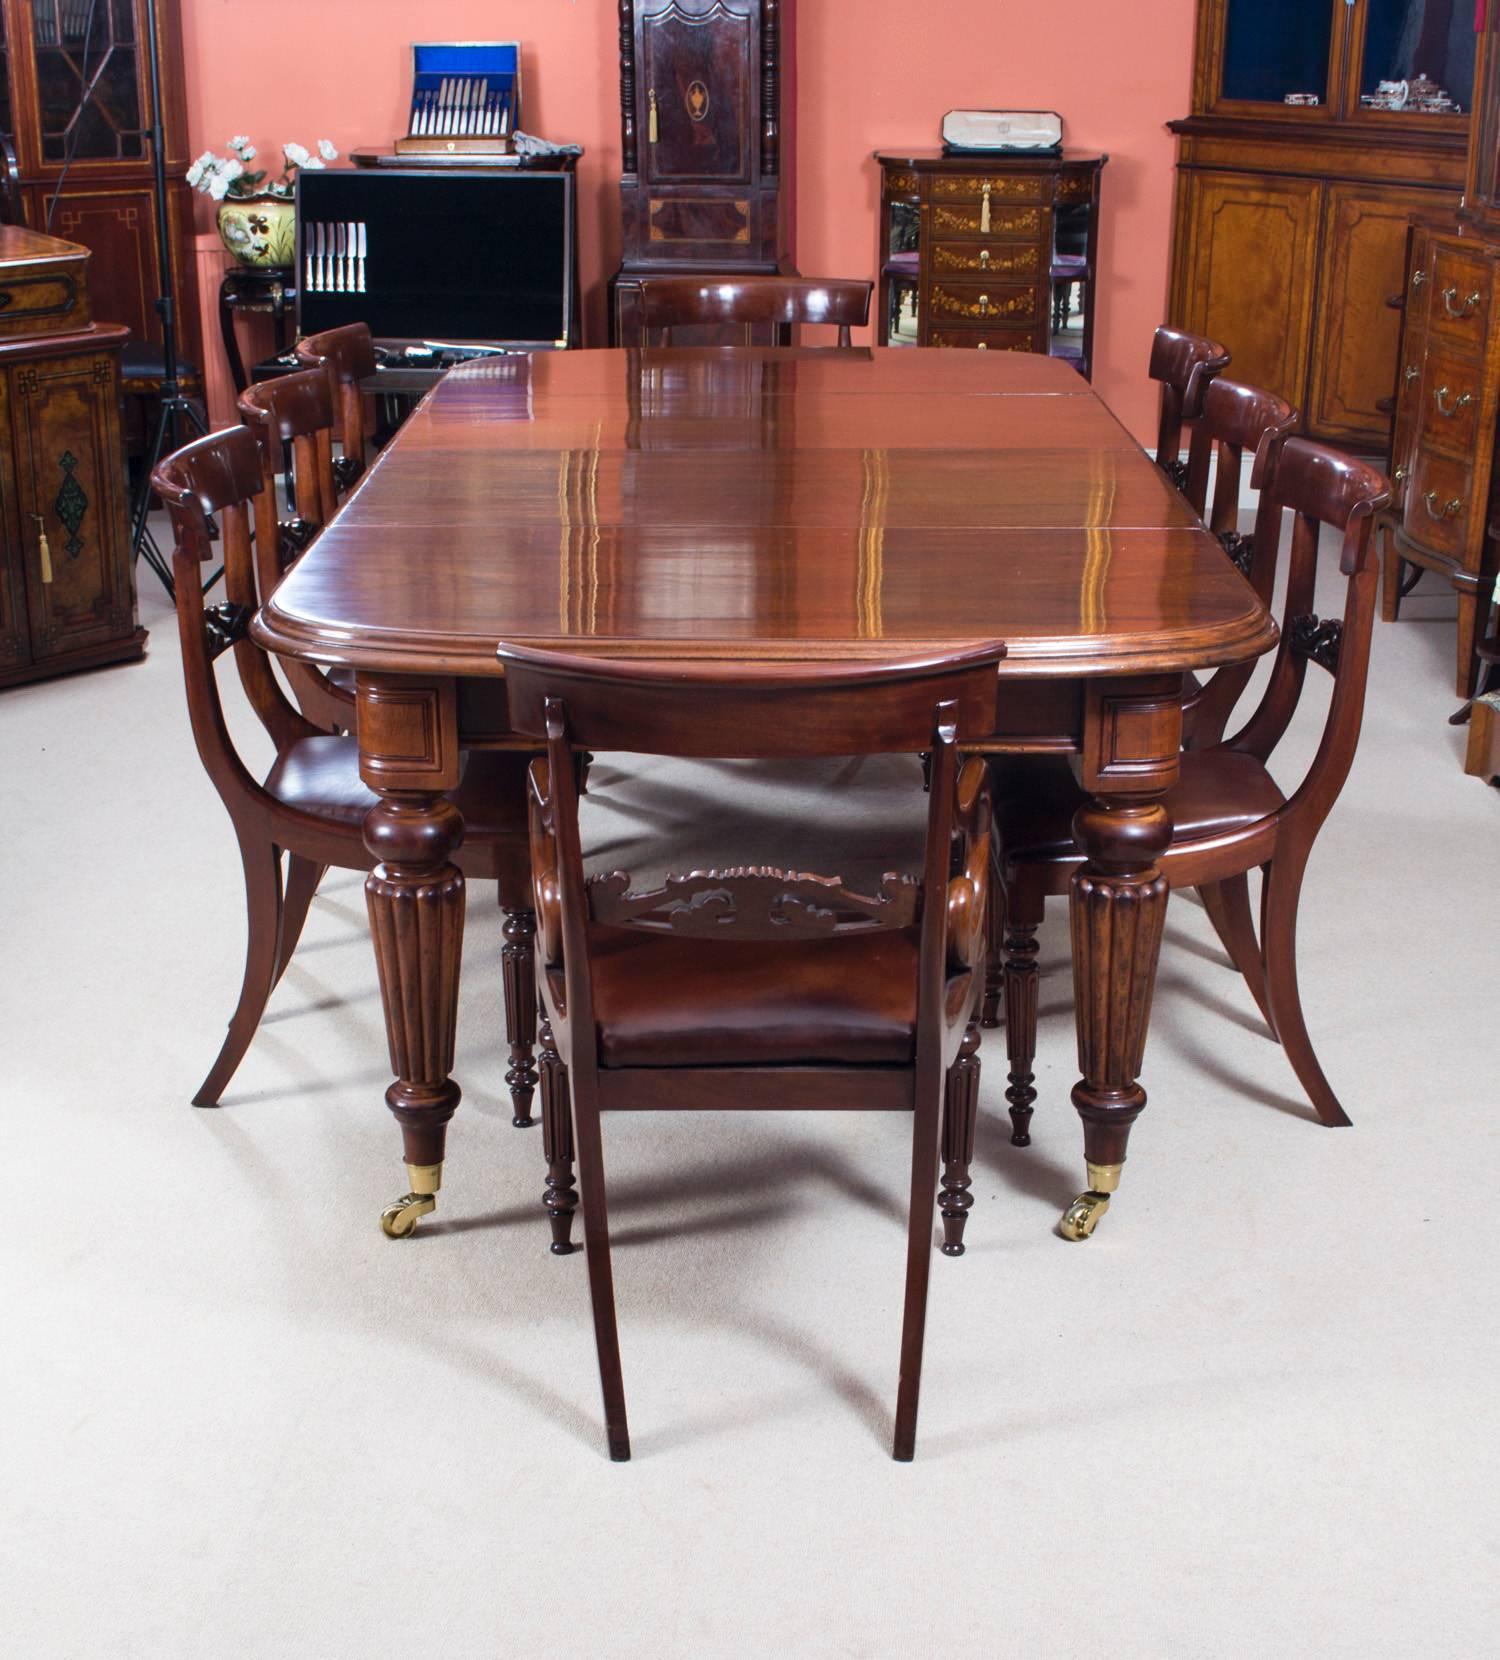 This is a beautiful antique dining set comprising a Victorian D-end mahogany dining table, circa 1850 in date, and a set of eight English antique Regency dining chairs, circa 1820 in date. 

This amazing table has two original leaves, can sit